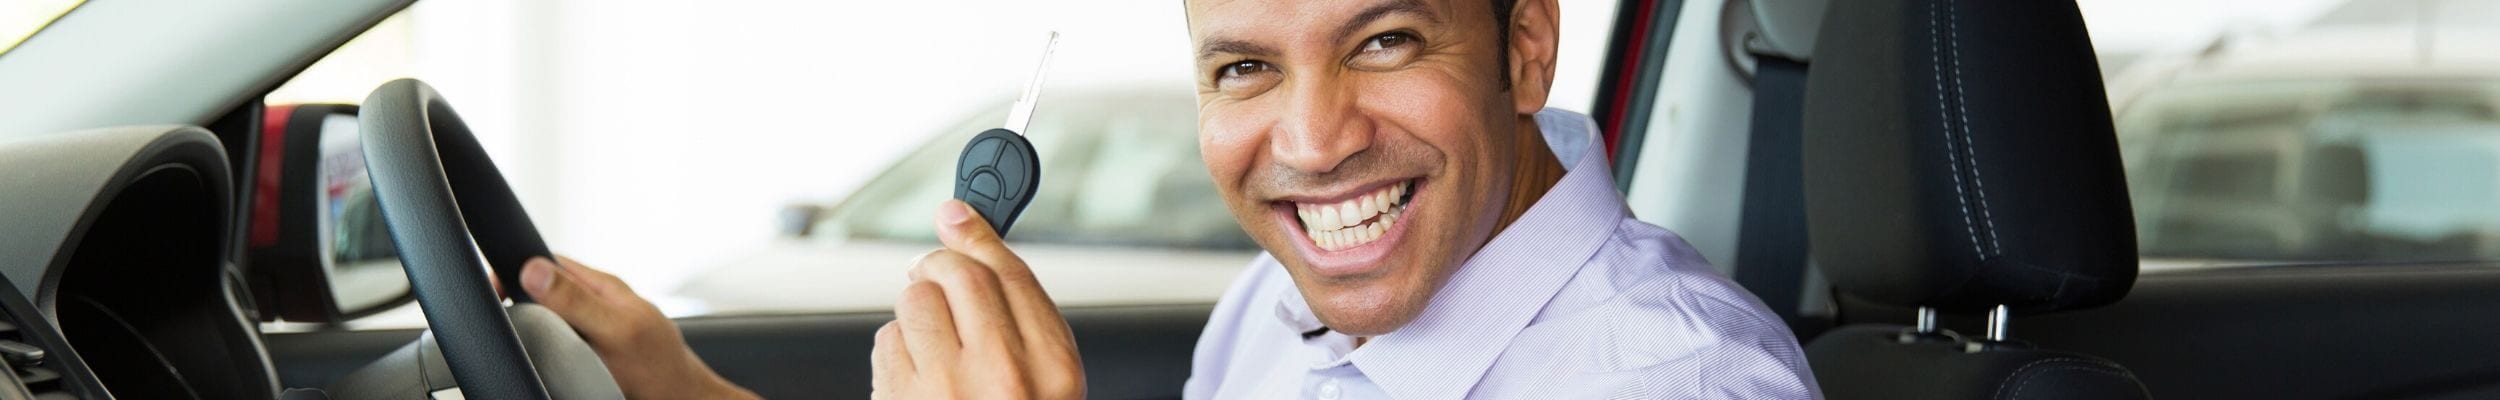 Man smiling in new car with keys